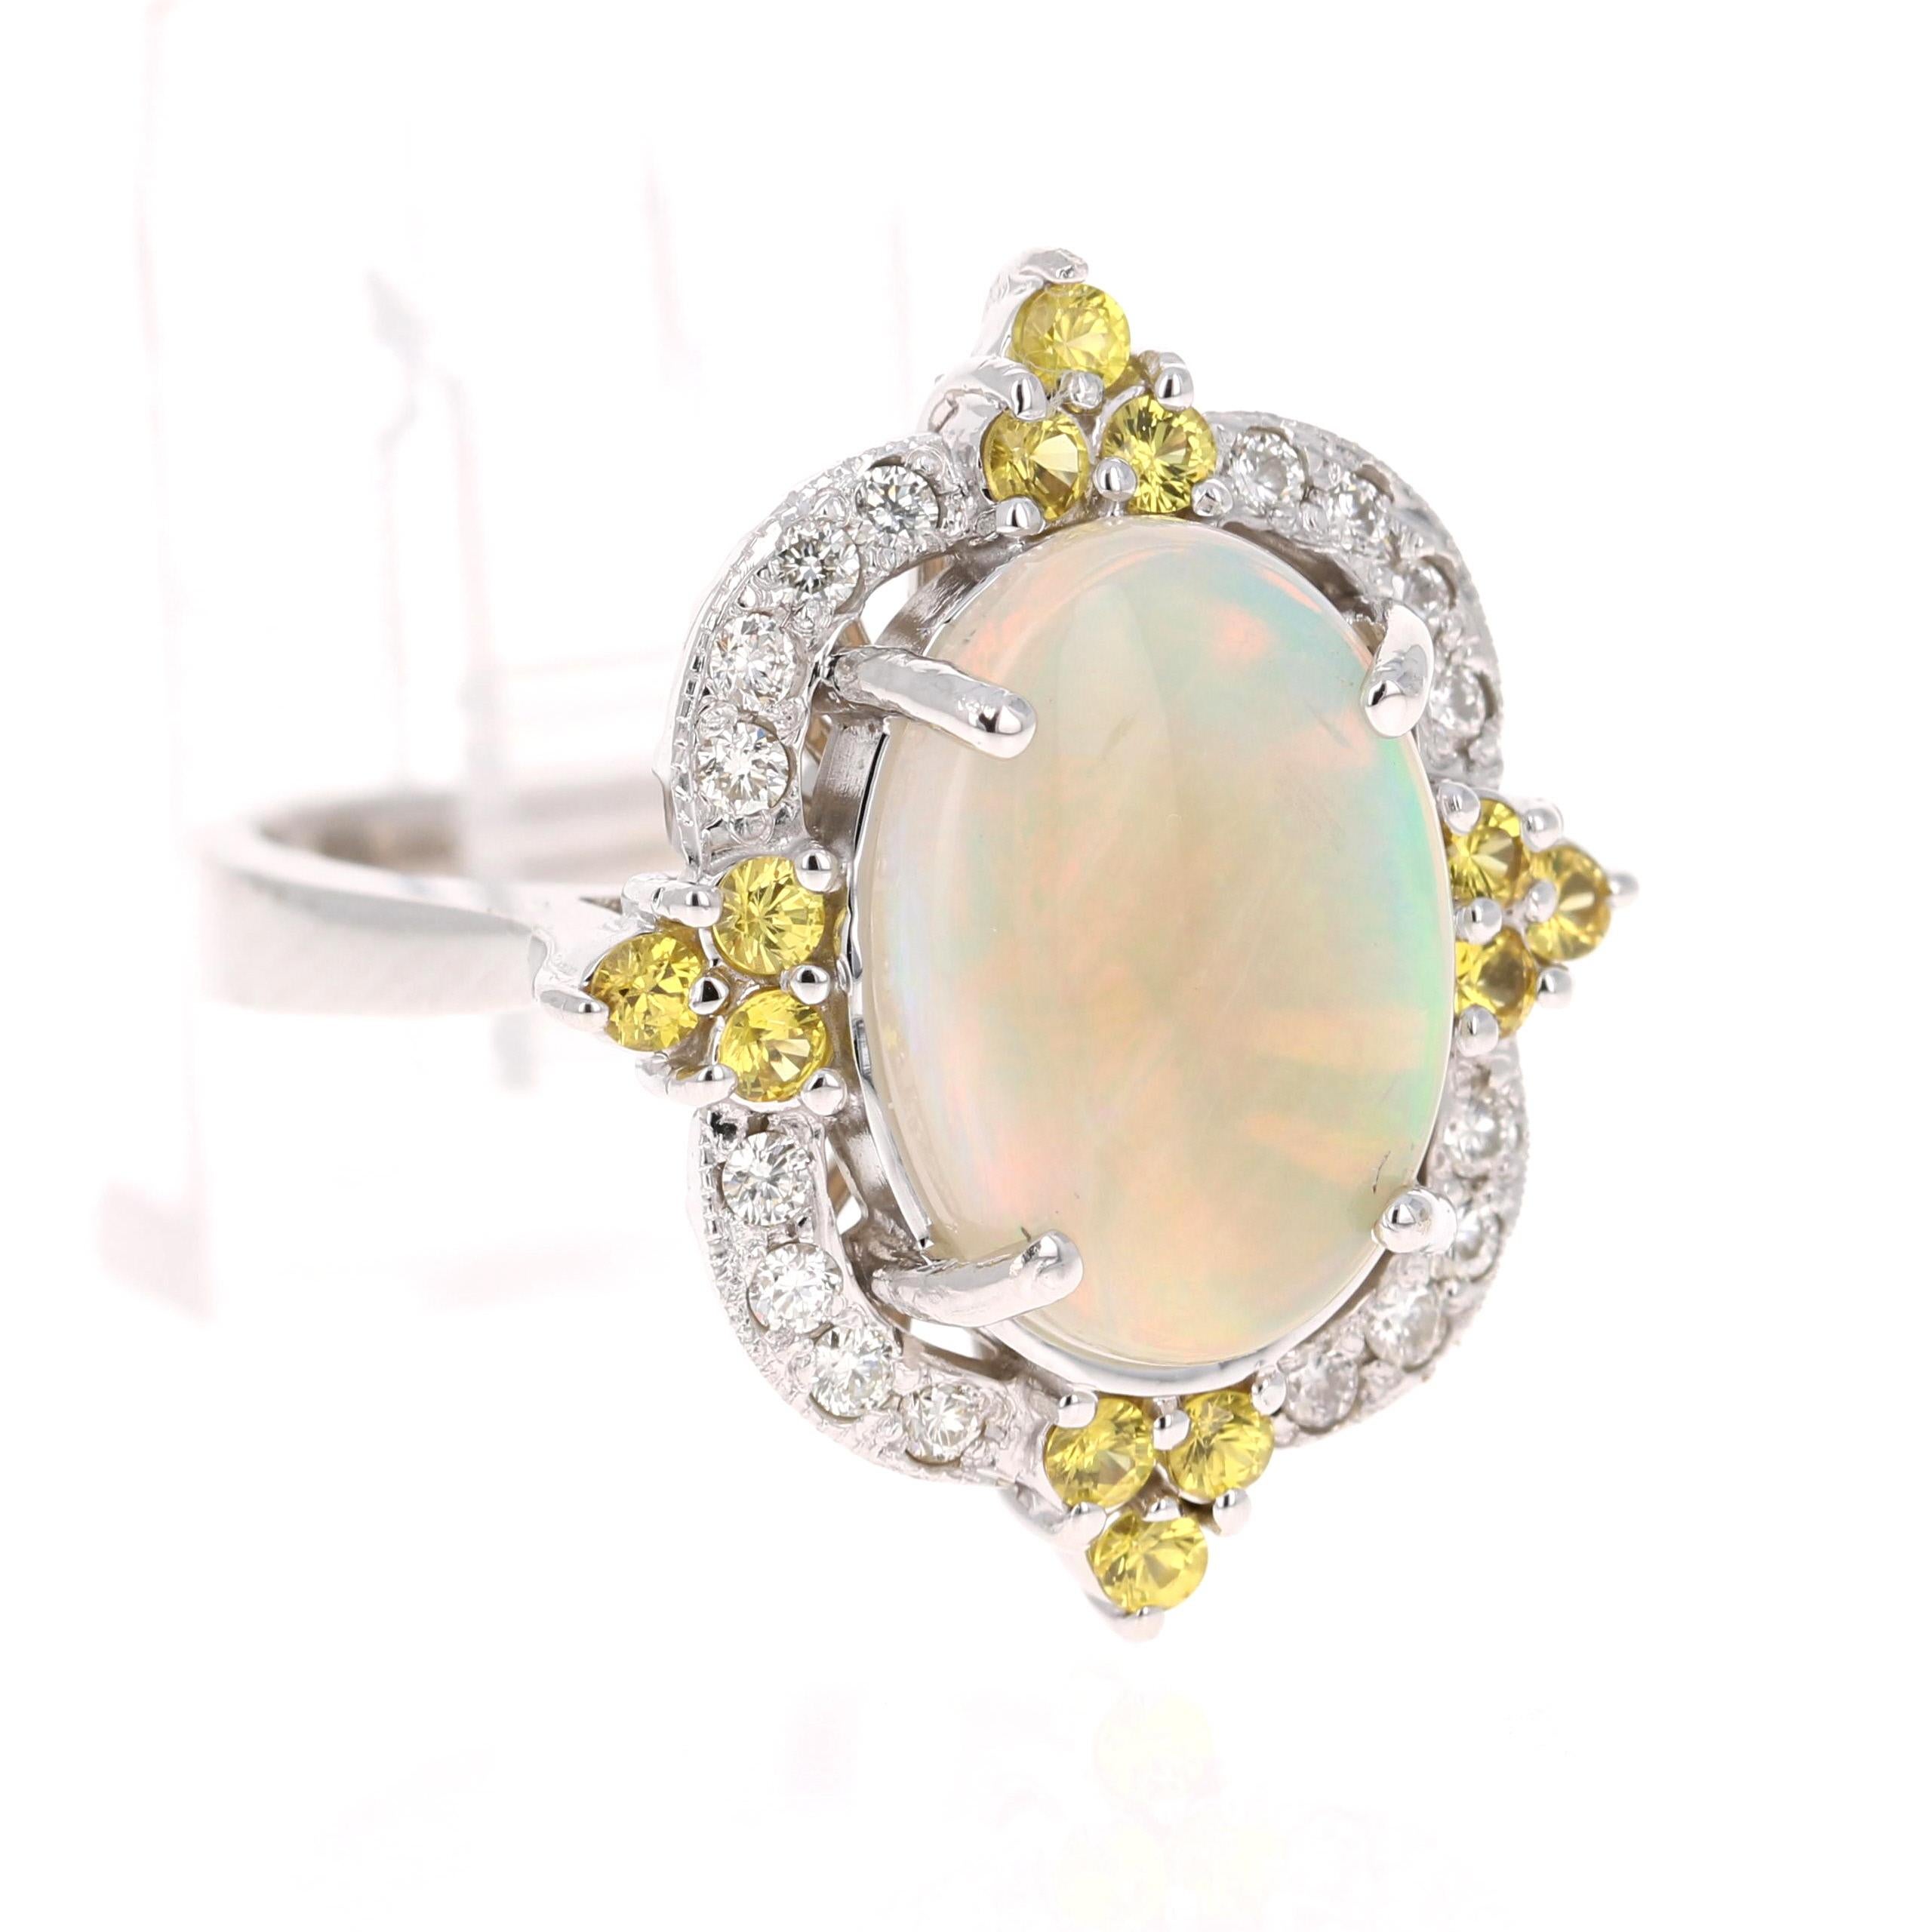 Opulent Opal, Yellow Sapphire and Diamond Ring in 14K White Gold.

The beautiful Oval Cut, Ethiopian-Origin Opal with its striking flashes of color weighs 2.78 Carats. The Opal has flashes of color ranging from green, orange, yellow and red.  It is